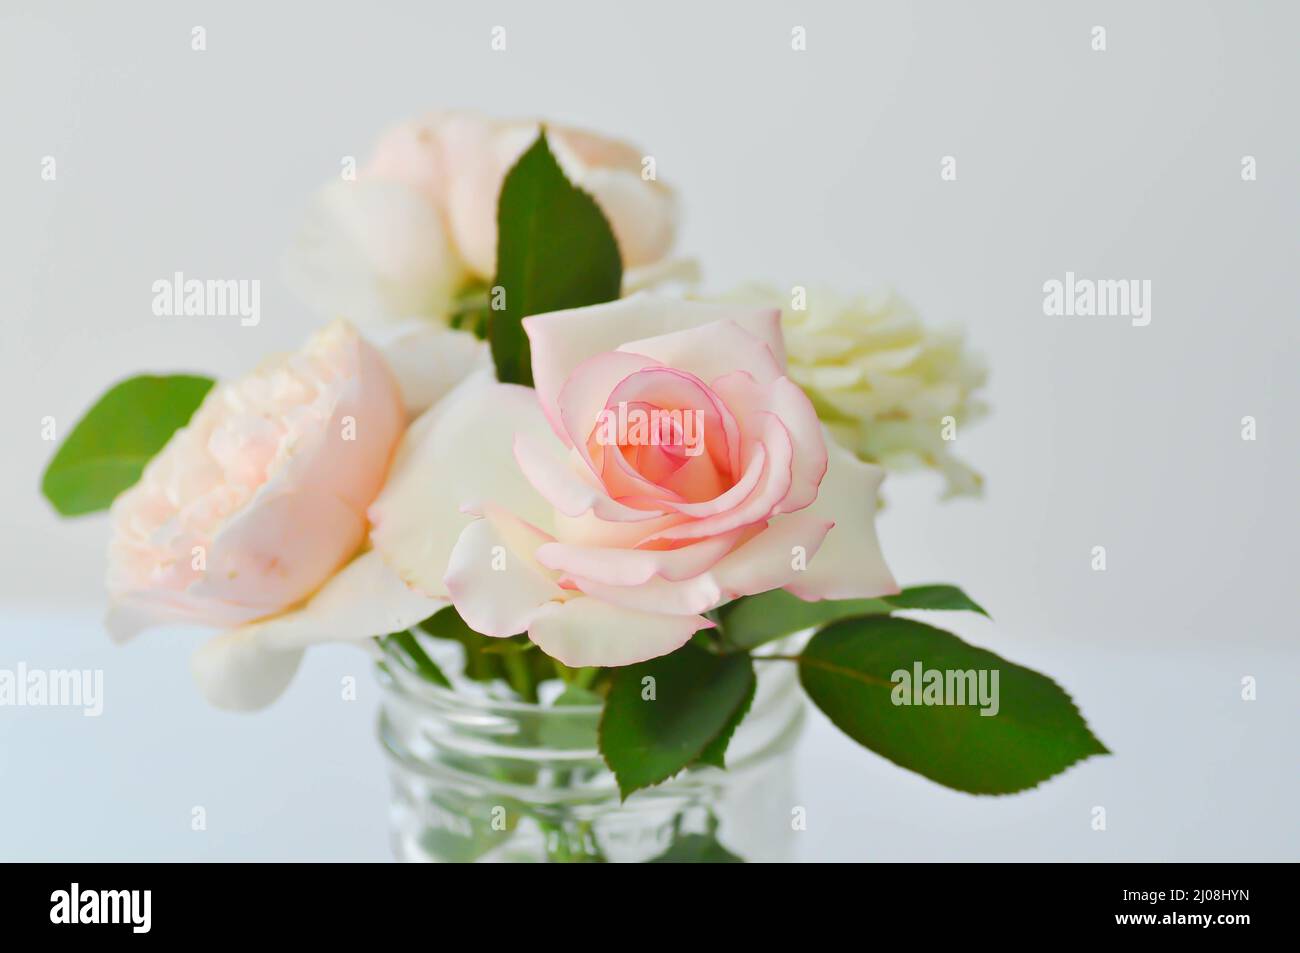 rose, roses or flowers in a vase Stock Photo